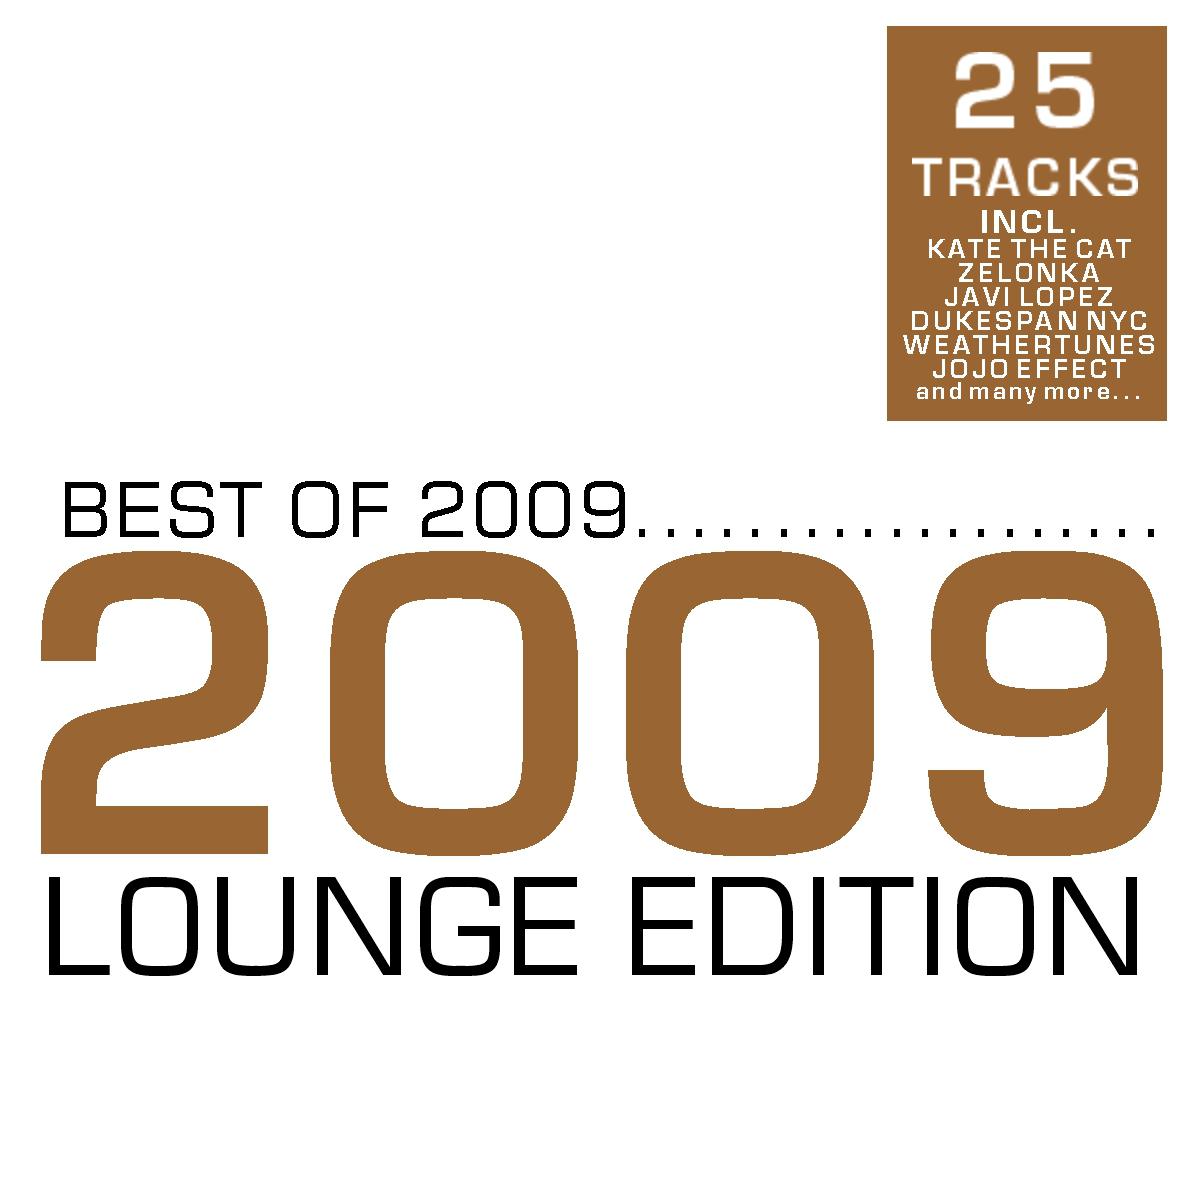 Best of 2009 - Lounge Edition